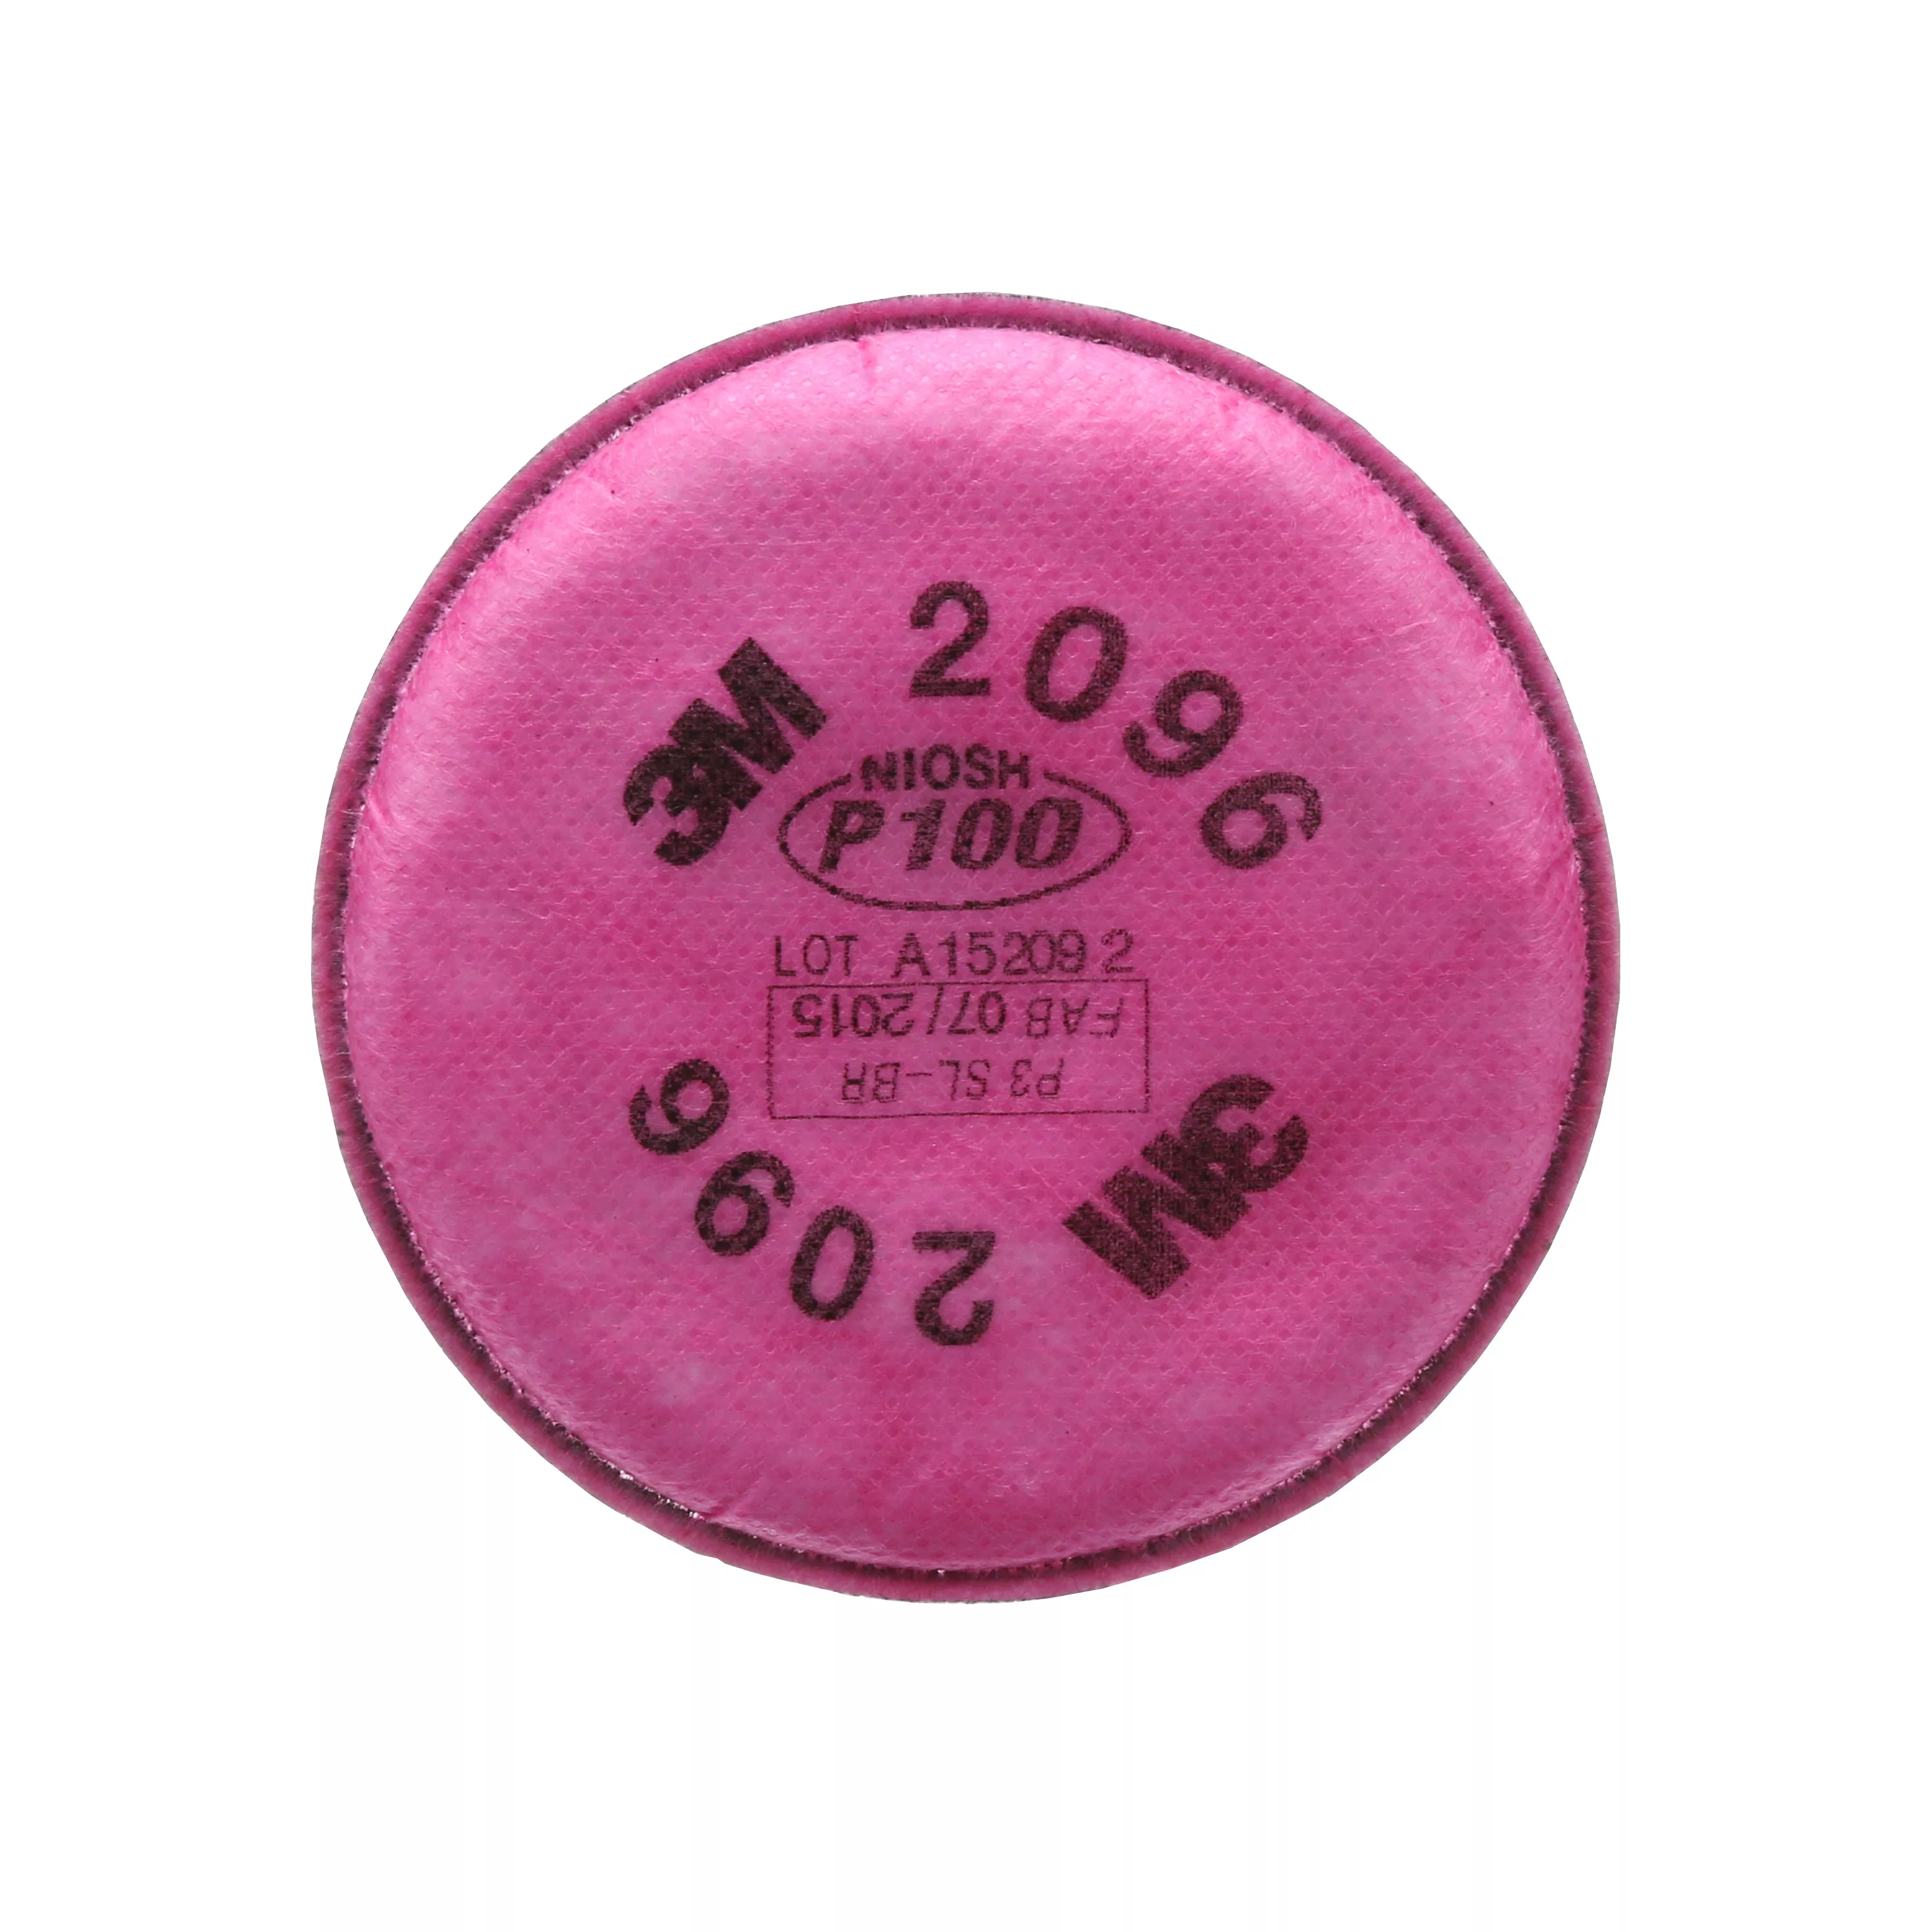 3M™ Particulate Filter 2096, P100, with Nuisance Level Acid Gas Relief
100 EA/Case